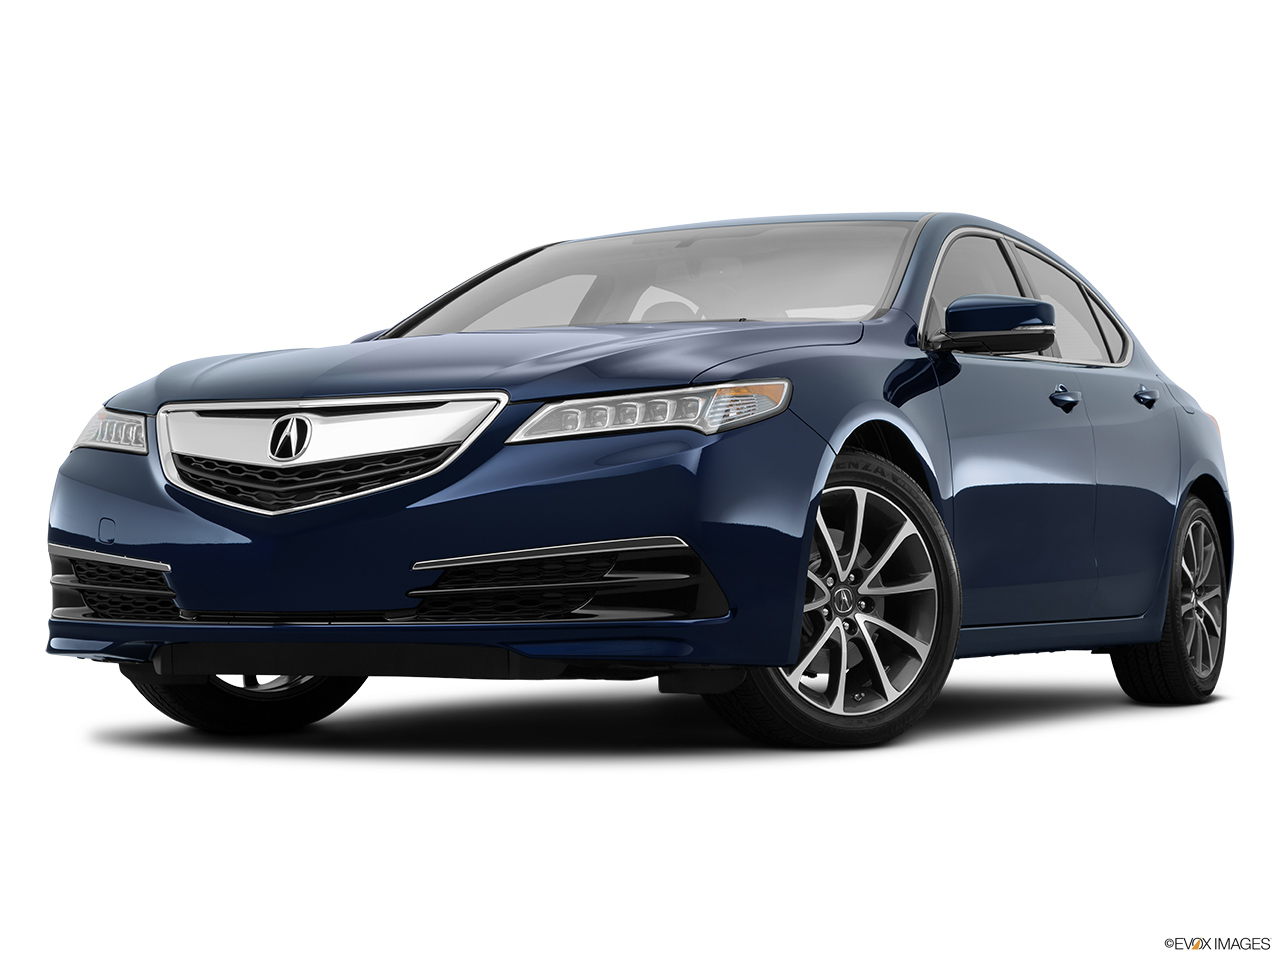 2016 Acura TLX 3.5 V-6 9-AT P-AWS Front angle view, low wide perspective. 